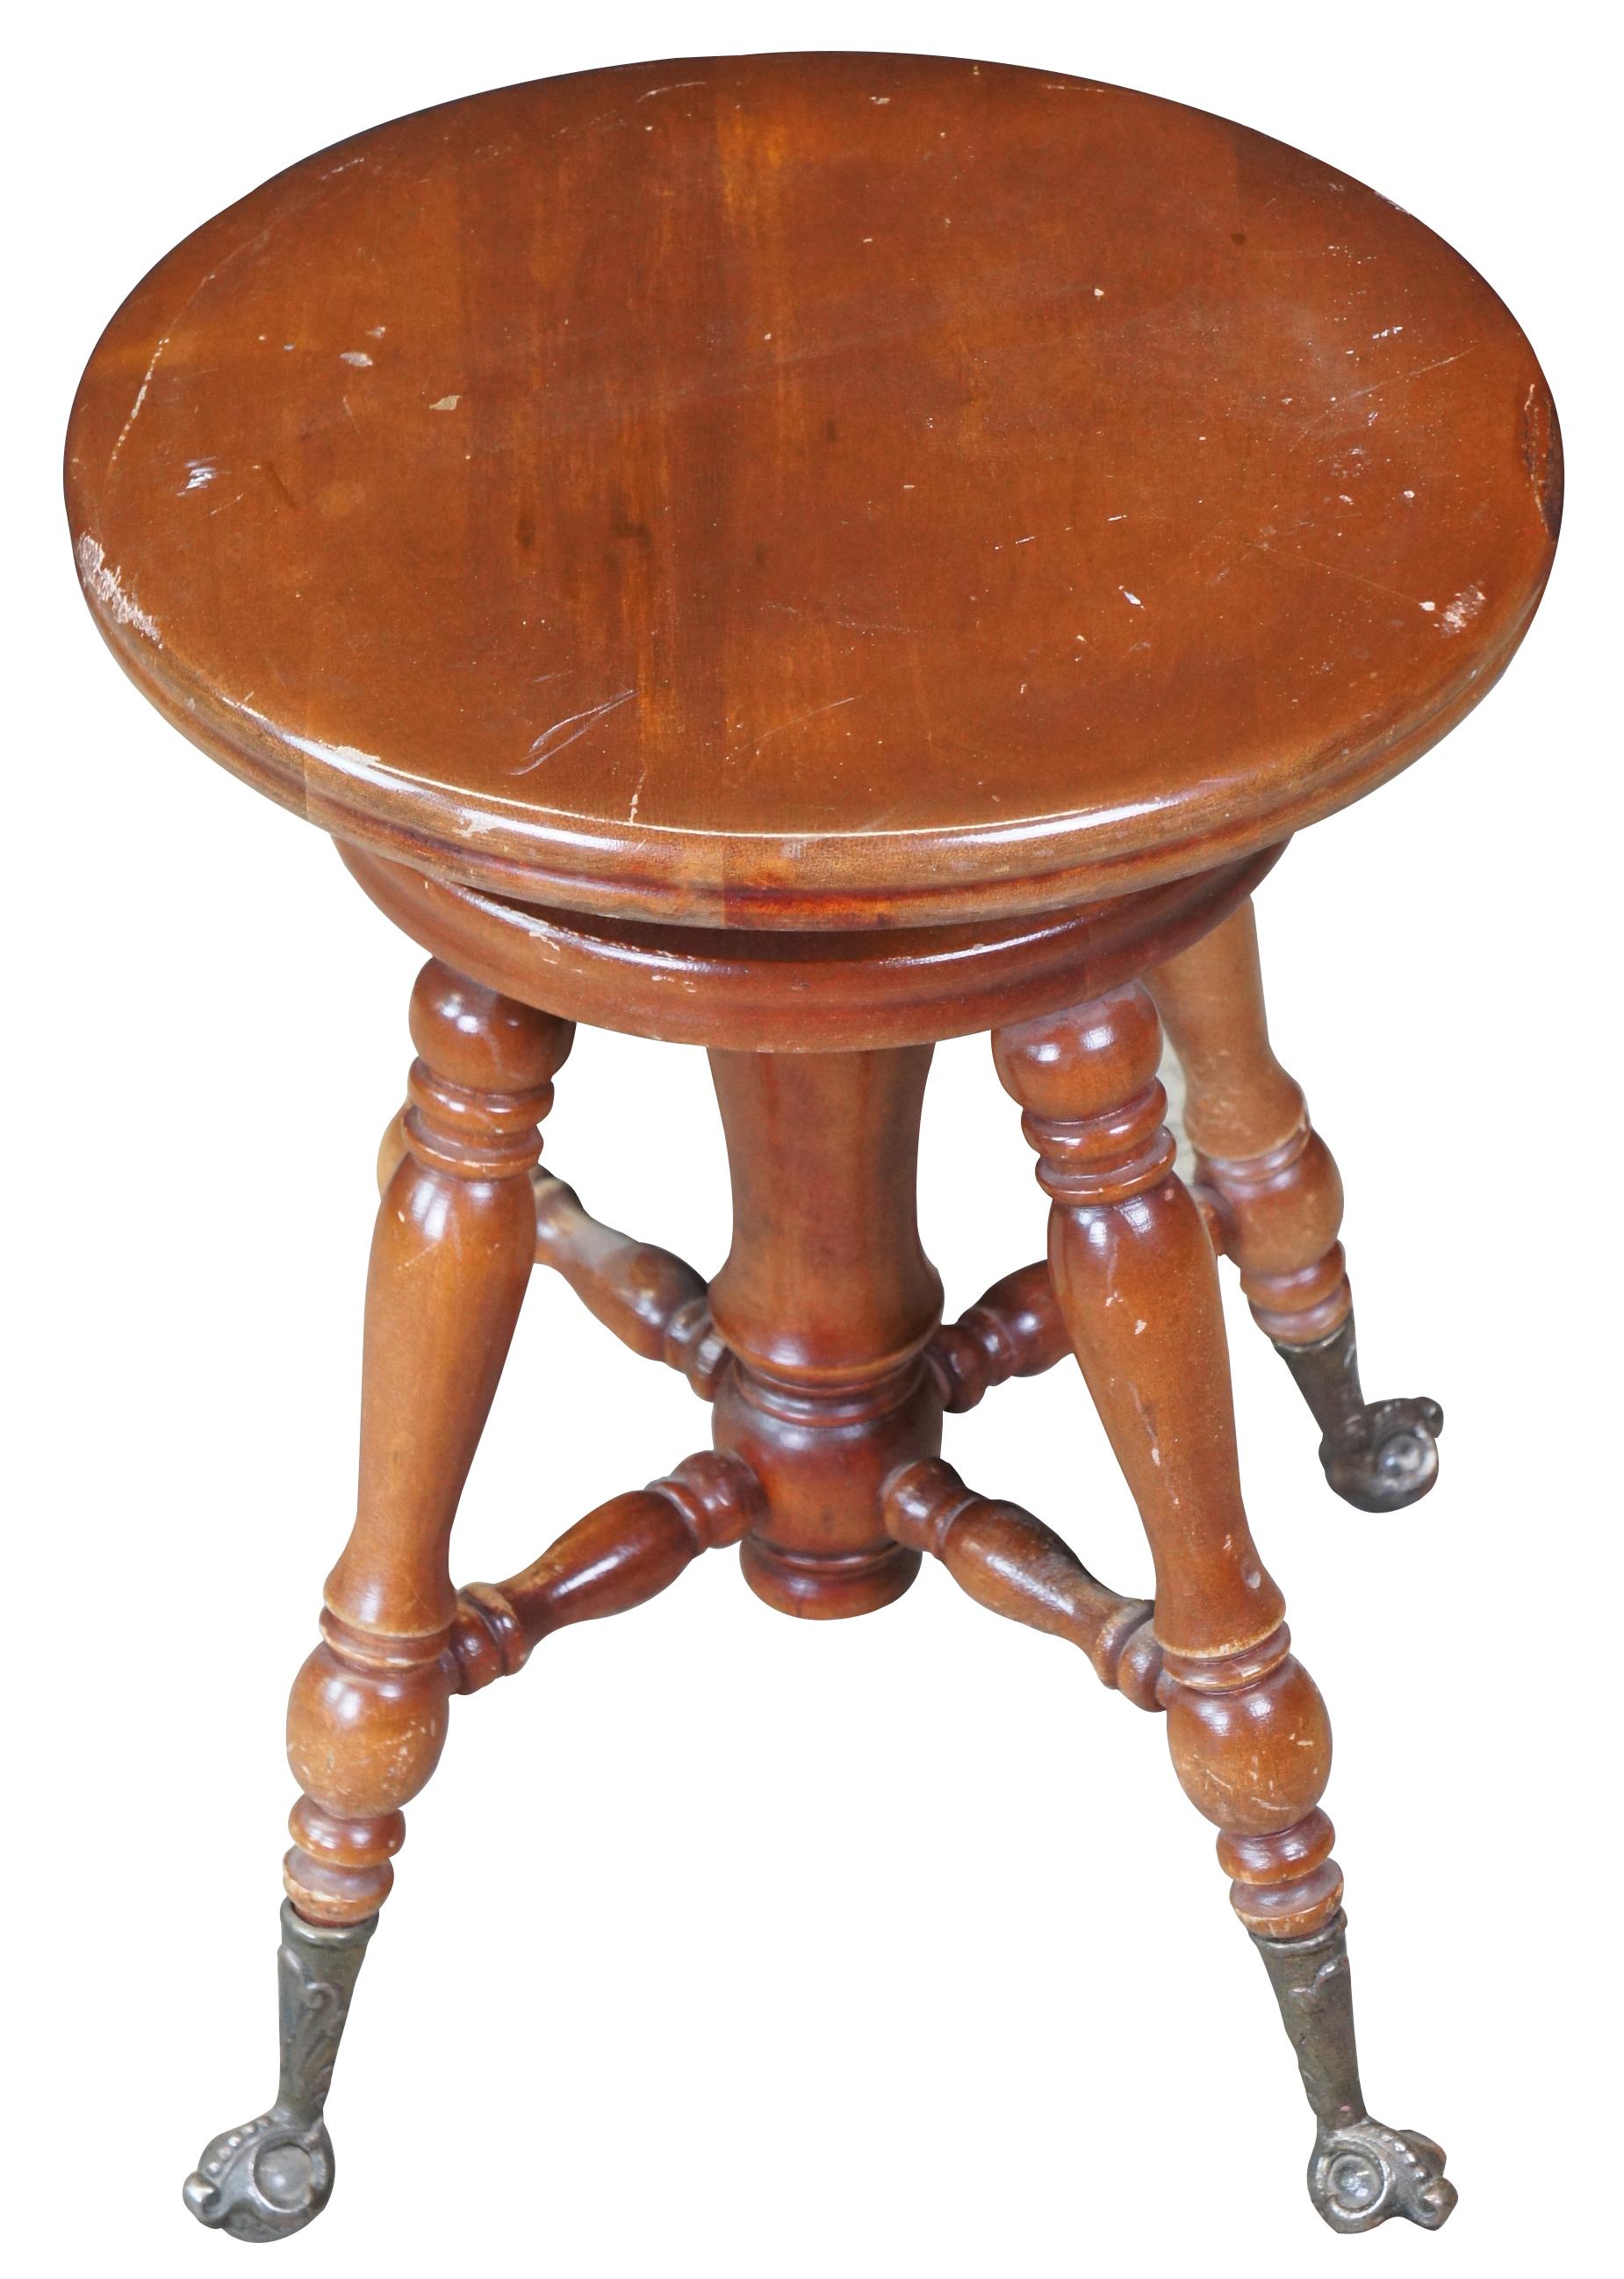 Racine Mfg Co piano stool. Circa 1909-1925. A classic Victorian design supported by metal talon feet hold glass balls

Diameter of Seat - 14.5